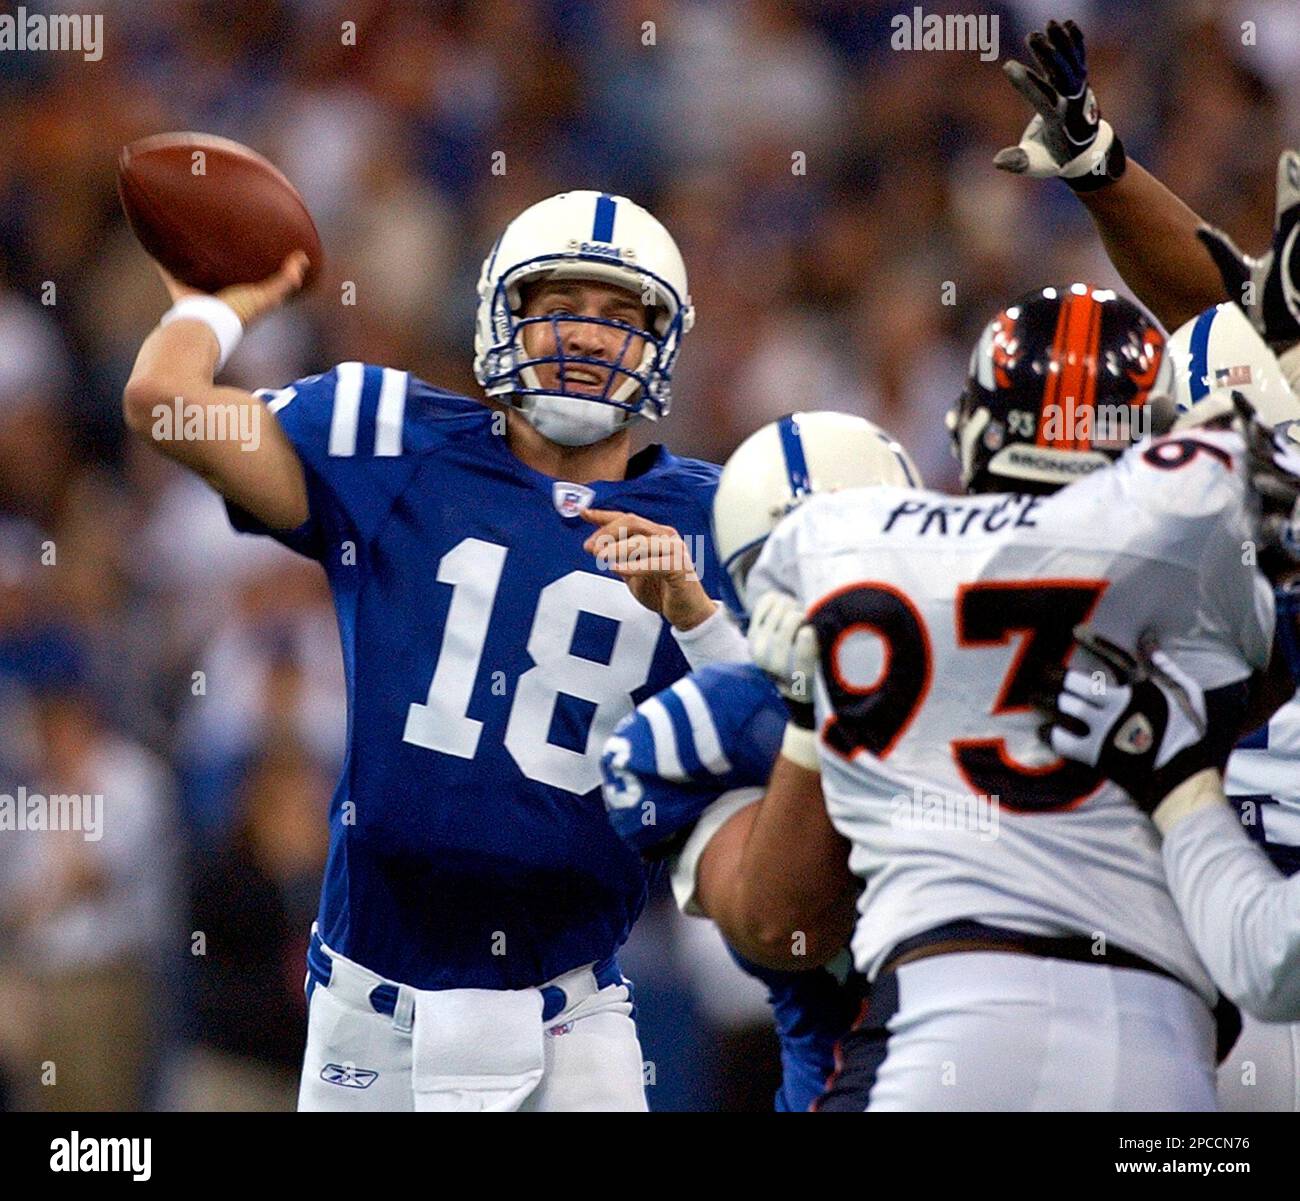 Peyton Manning and the Indianapolis Colts are off to another great